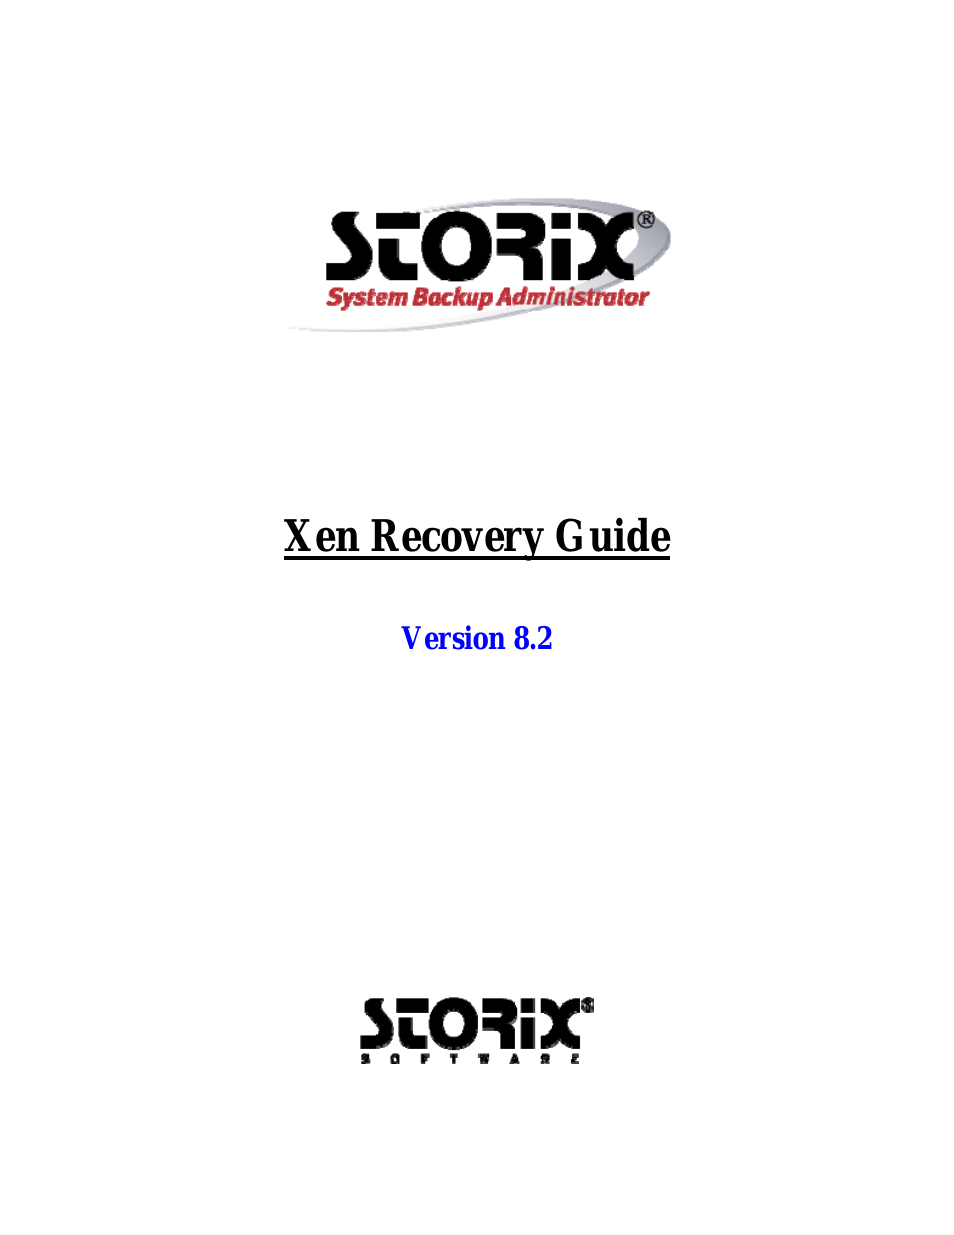 SBAdmin Backup and Recovery Guide for Xen Enabled Systems